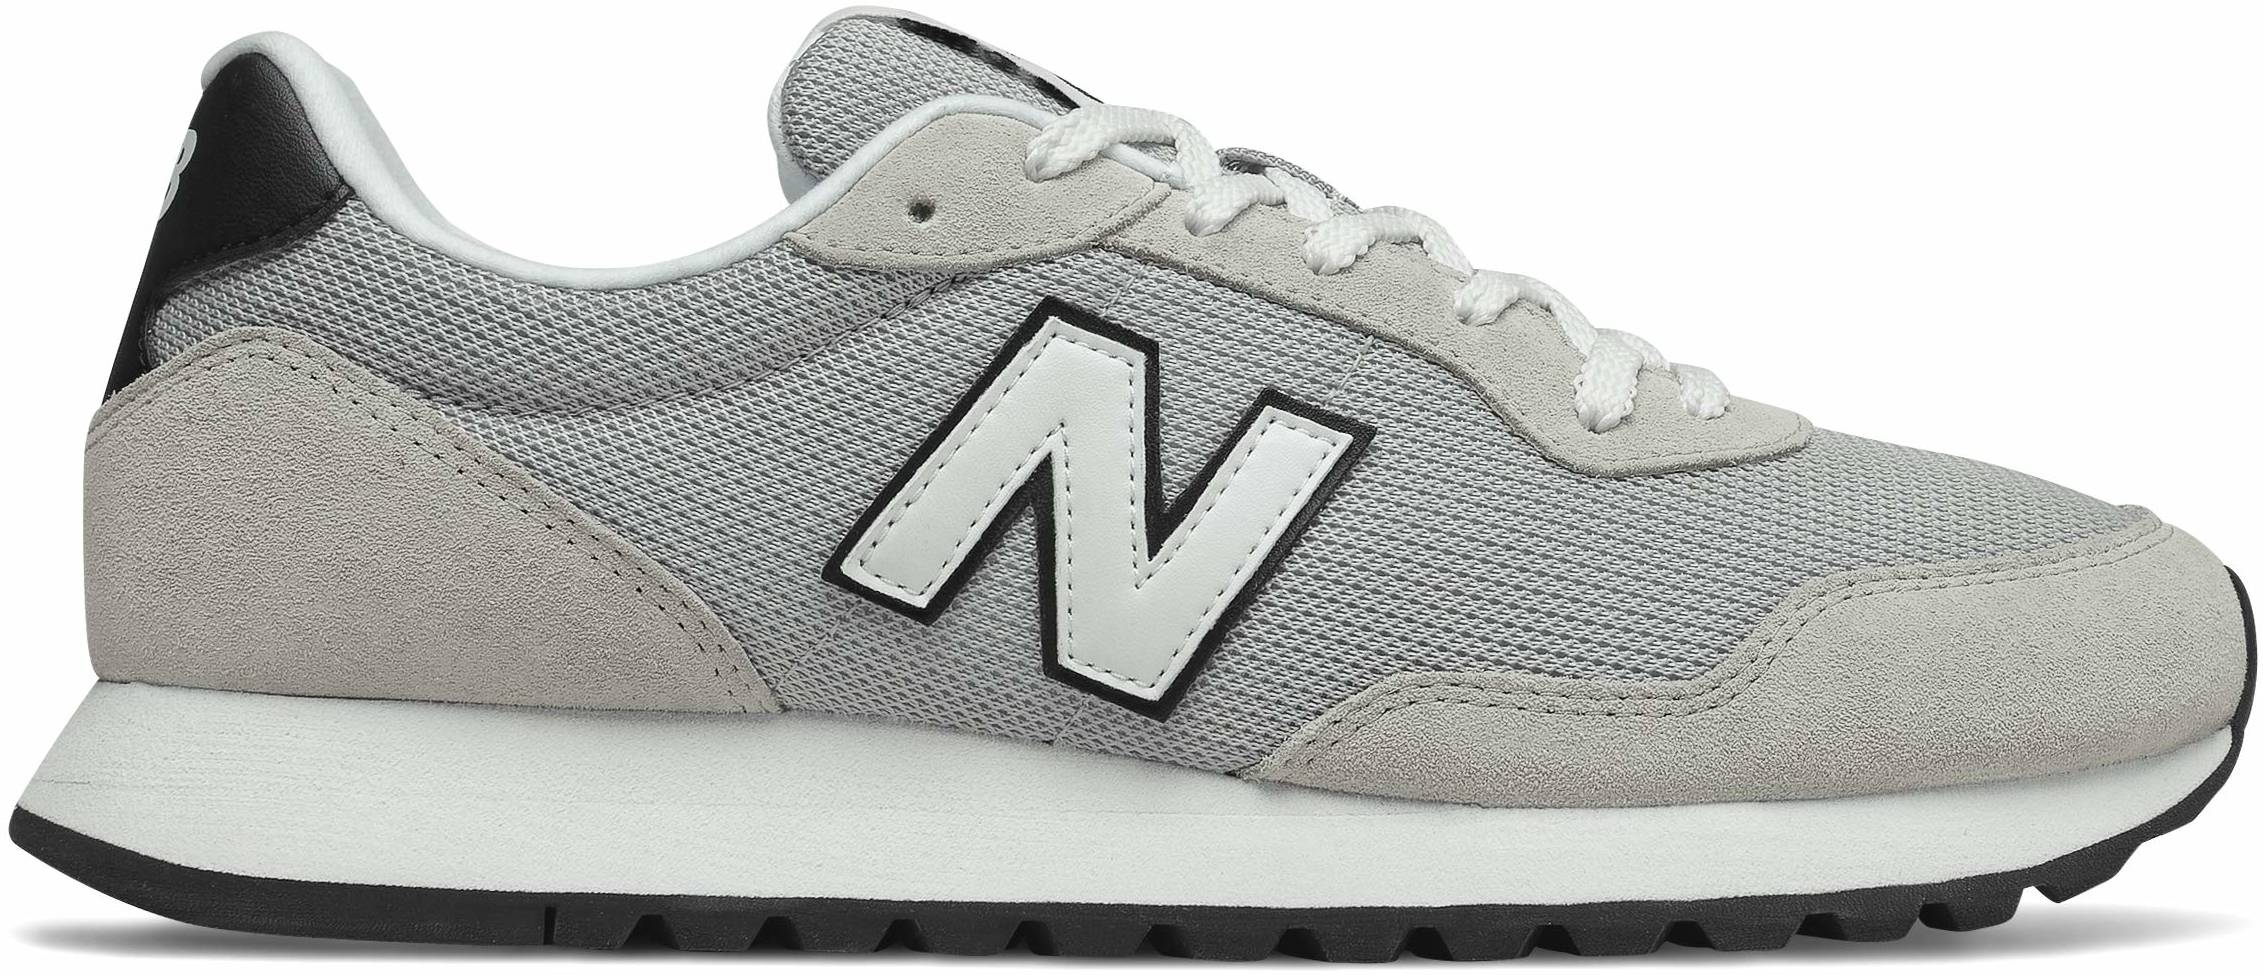 New Balance 527 sneakers in 9 colors (only $41) | RunRepeat